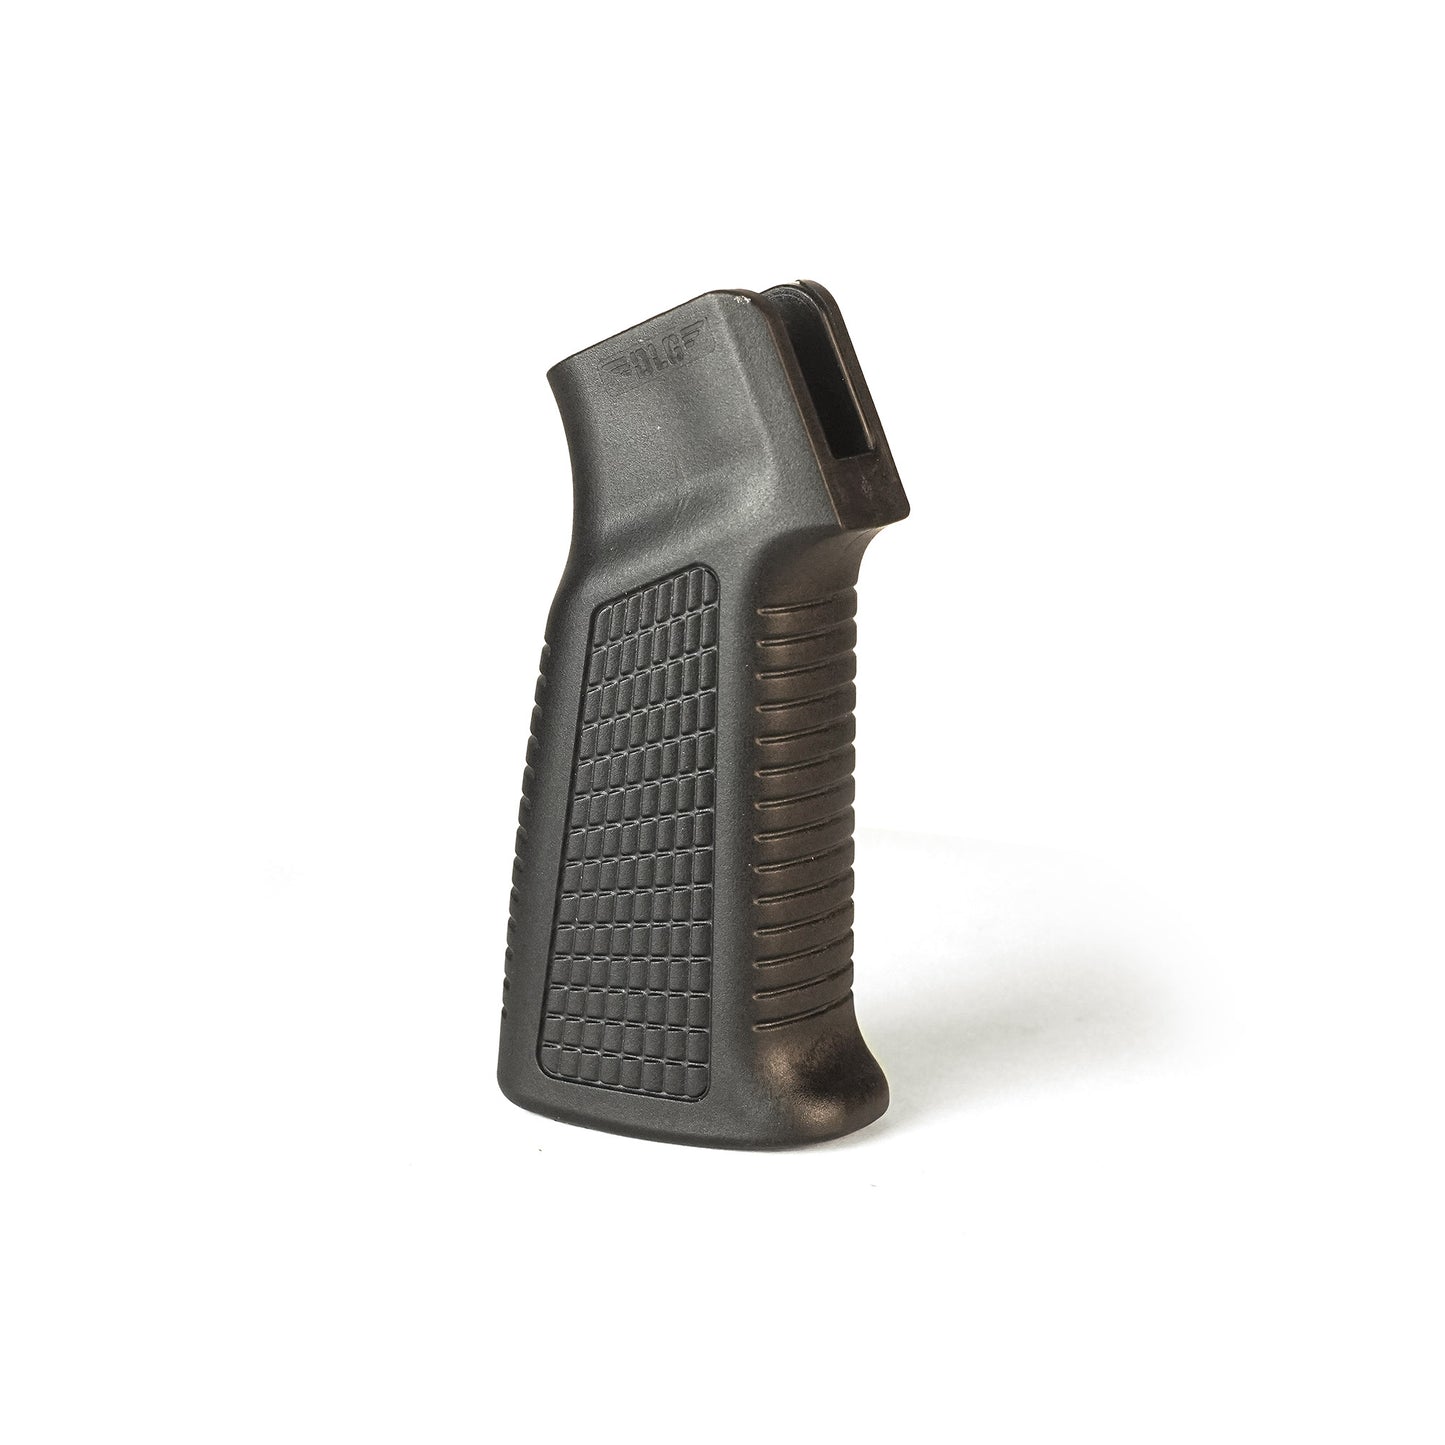 DLG Tactical x Wolverine Airsoft Pistol Grip for MTW